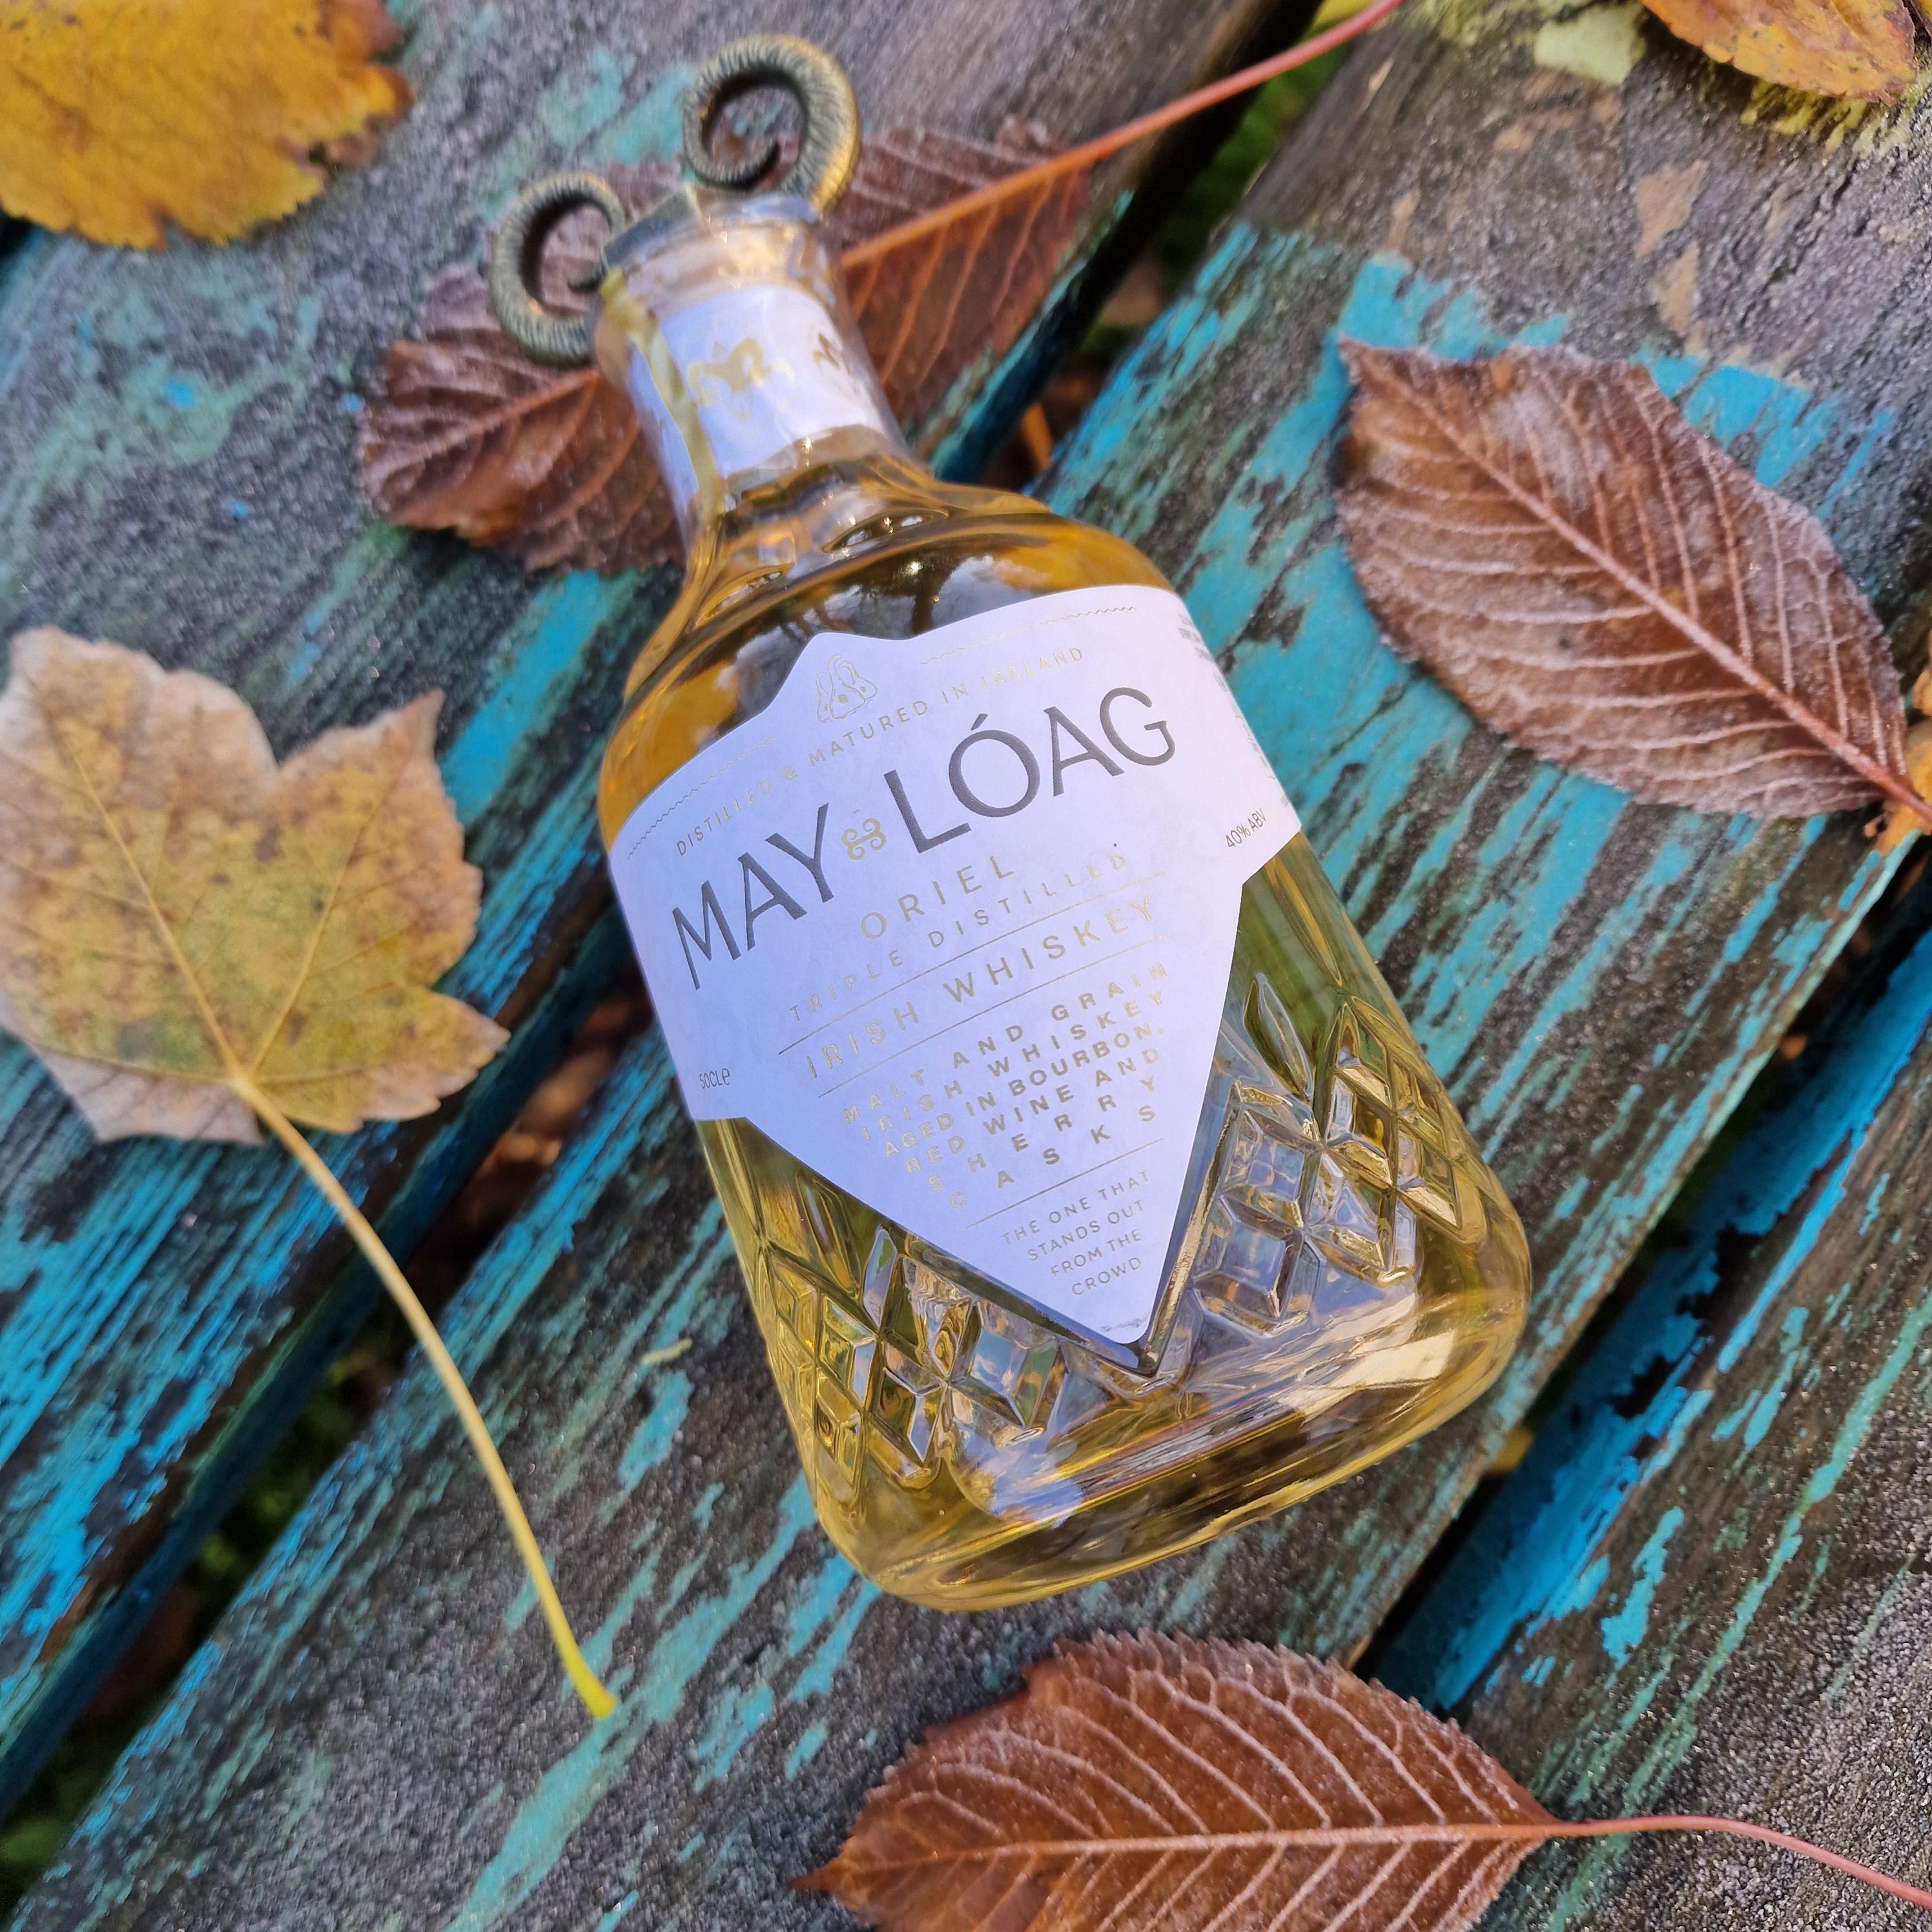 May Lóag Oriel Whiskey Review